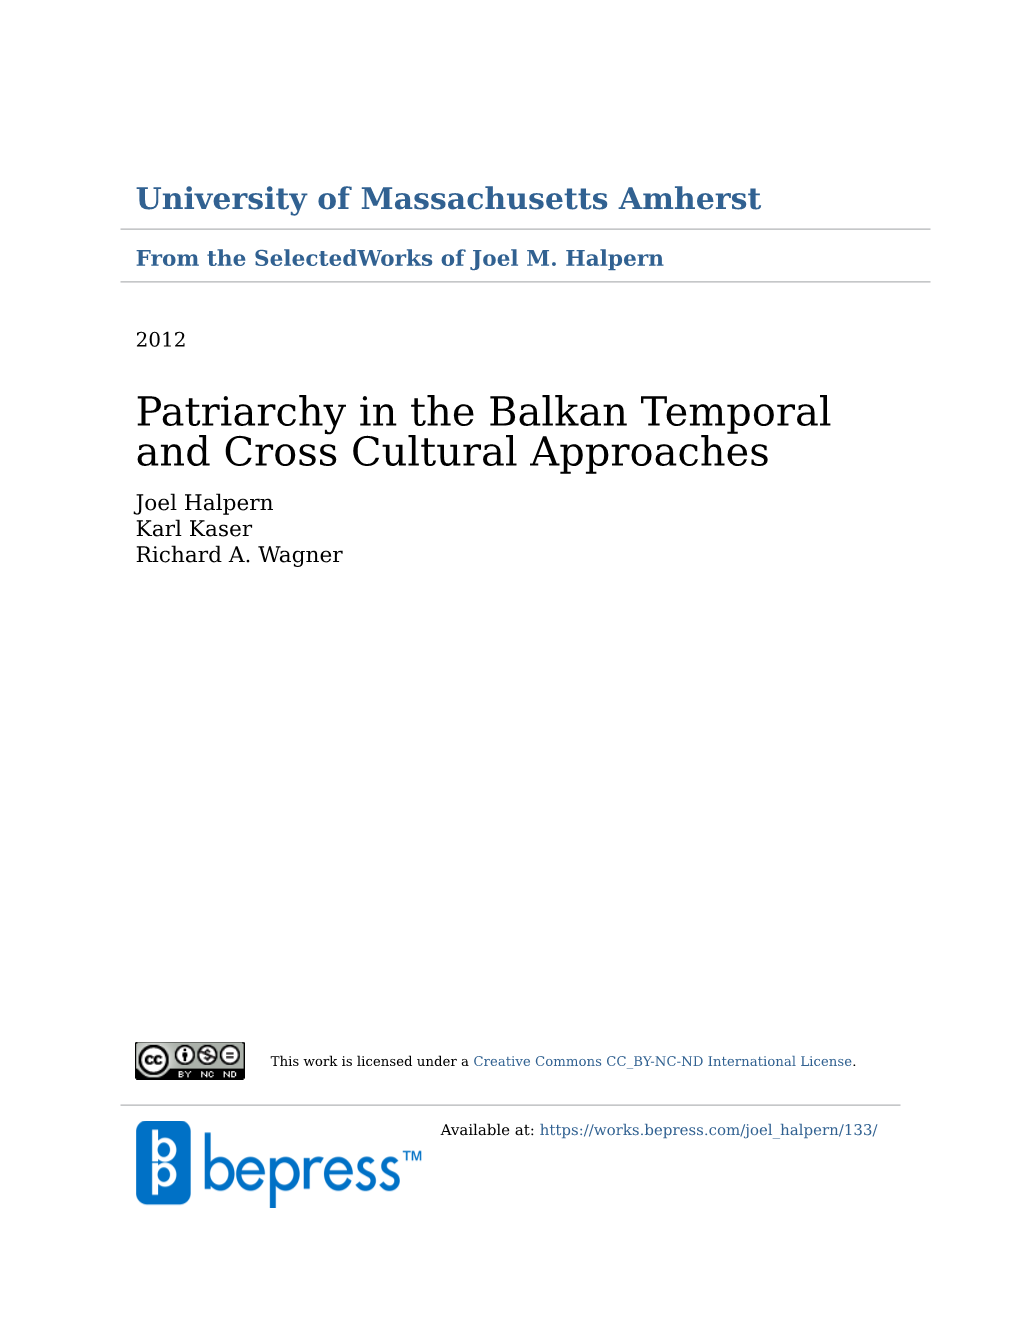 Patriarchy in the Balkan Temporal and Cross Cultural Approaches Joel Halpern Karl Kaser Richard A